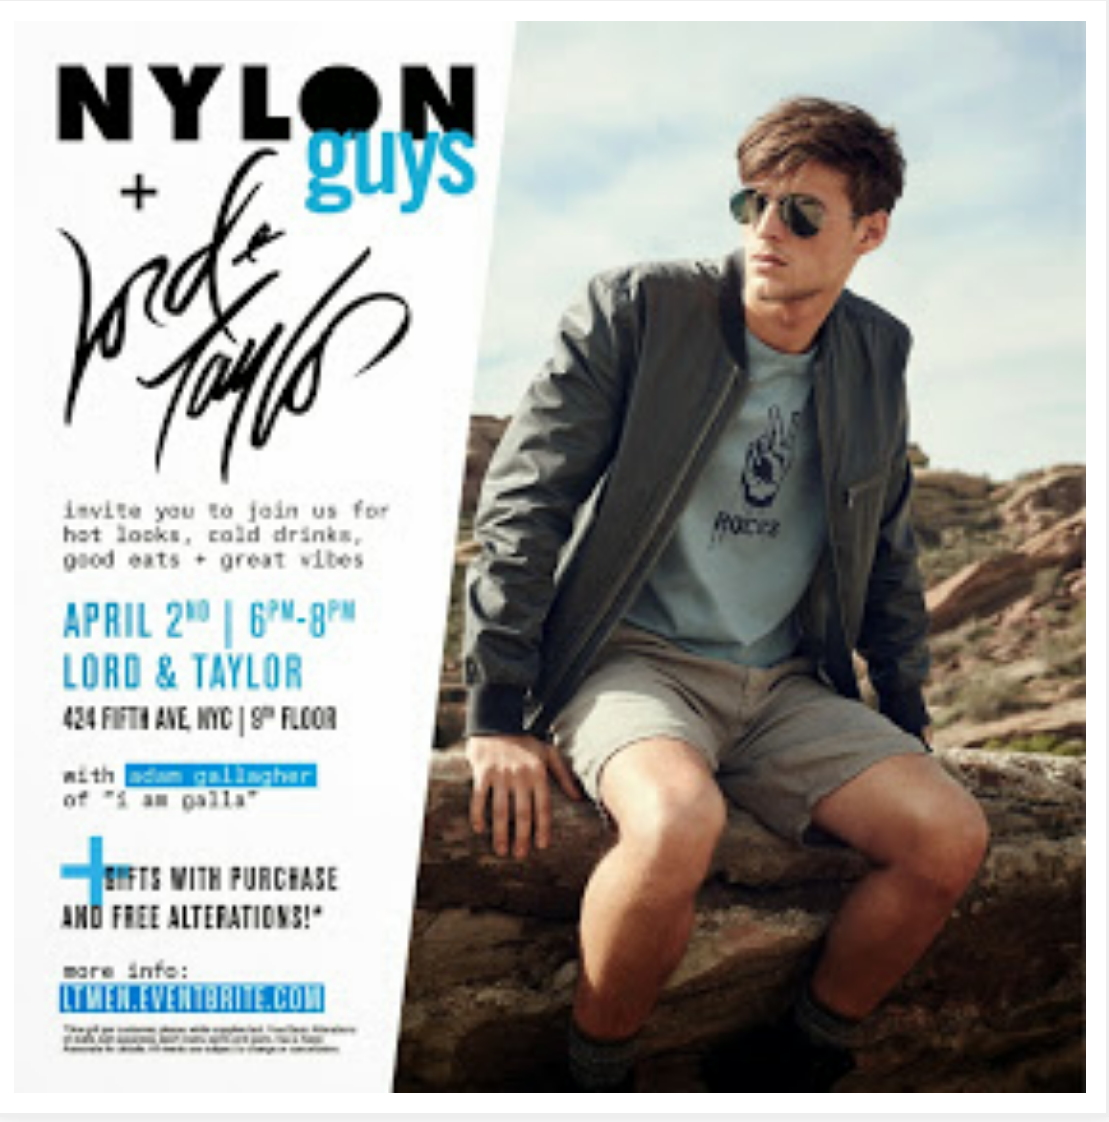 Nylon Guys + Lord & Taylor Men’s Style Guide Event | NYC Get Social